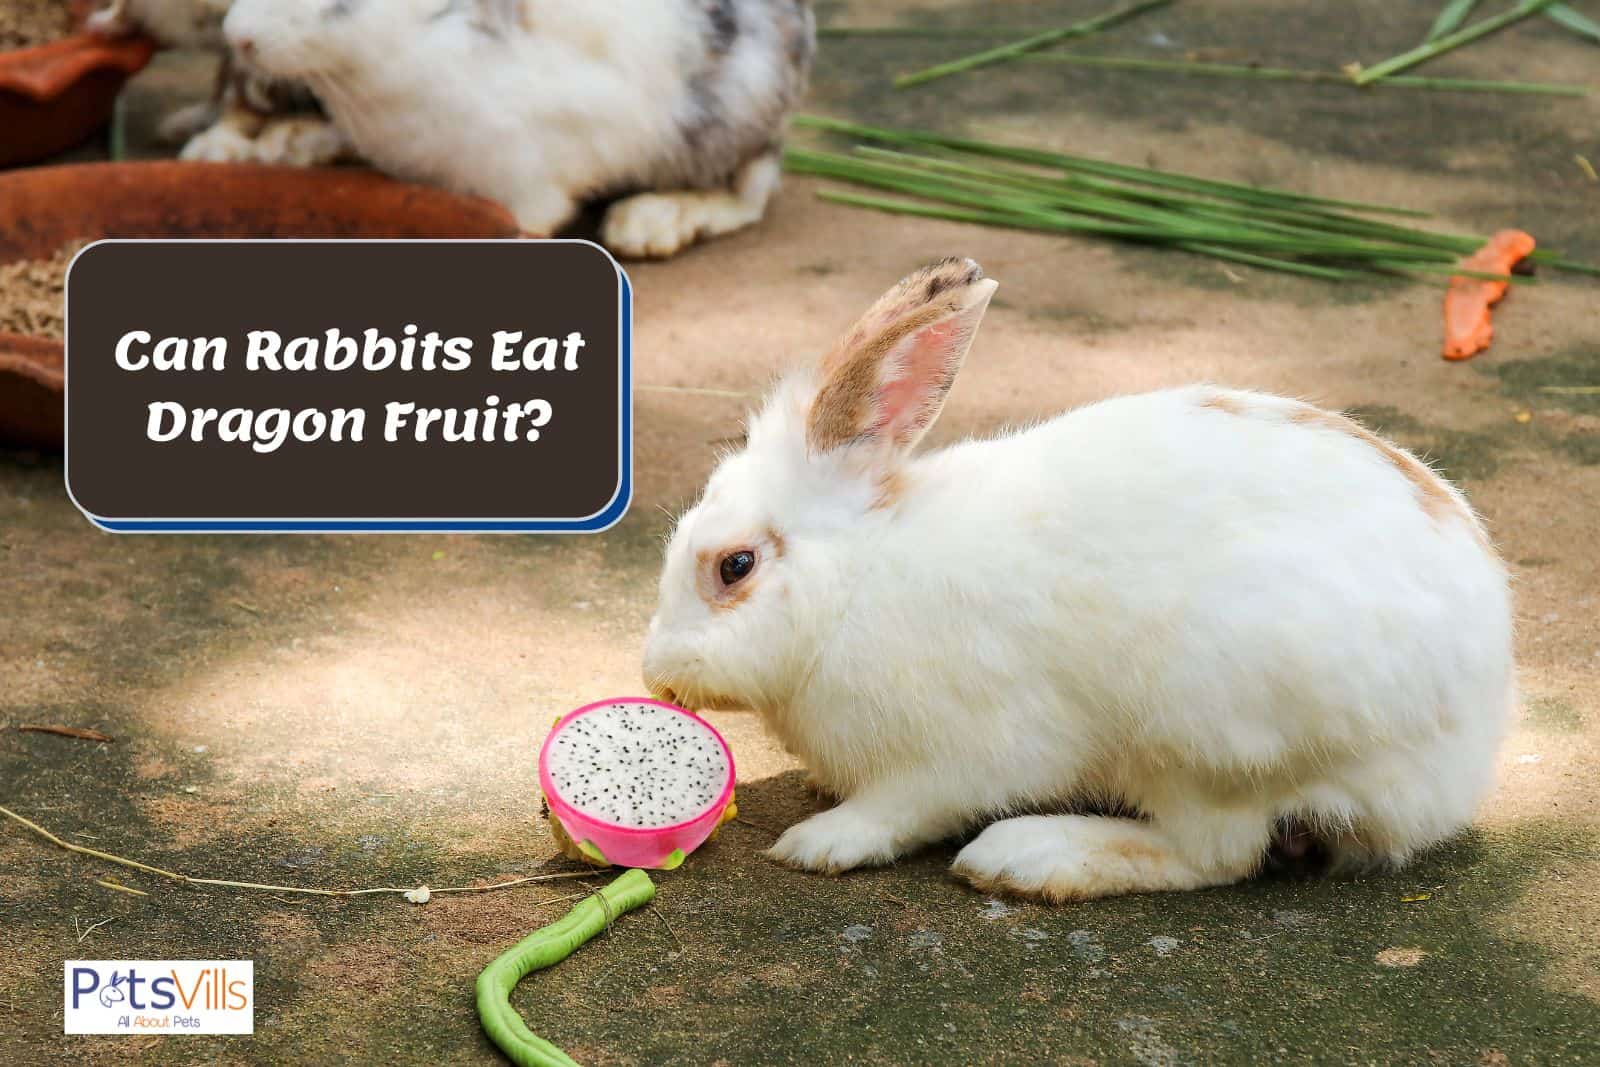 rabbits trying to eat dragon fruit but can rabbits eat dragon fruit